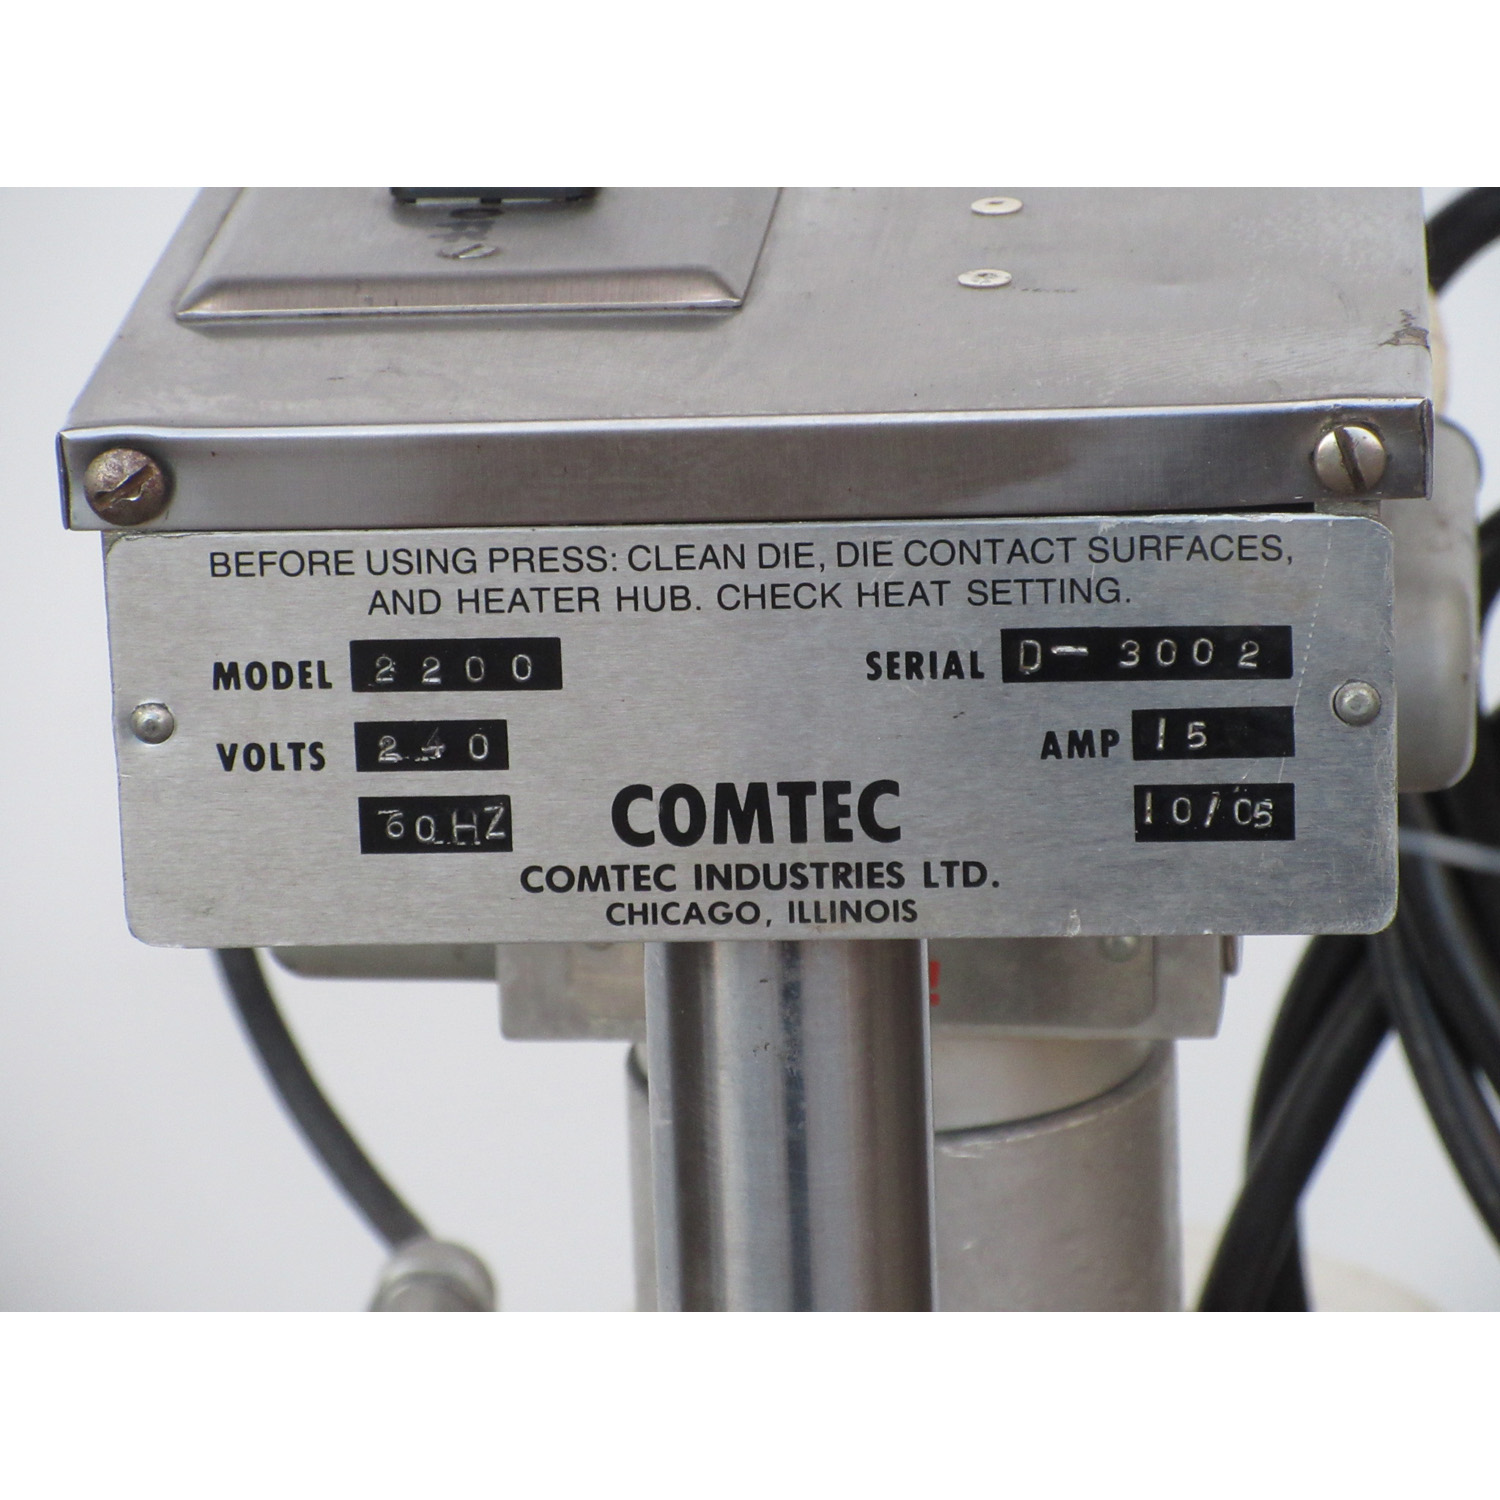 Comtec 2200 Hydraulic Double Pie Press, W/Top Pie-Crust Tool, Used Excellent Condition image 1